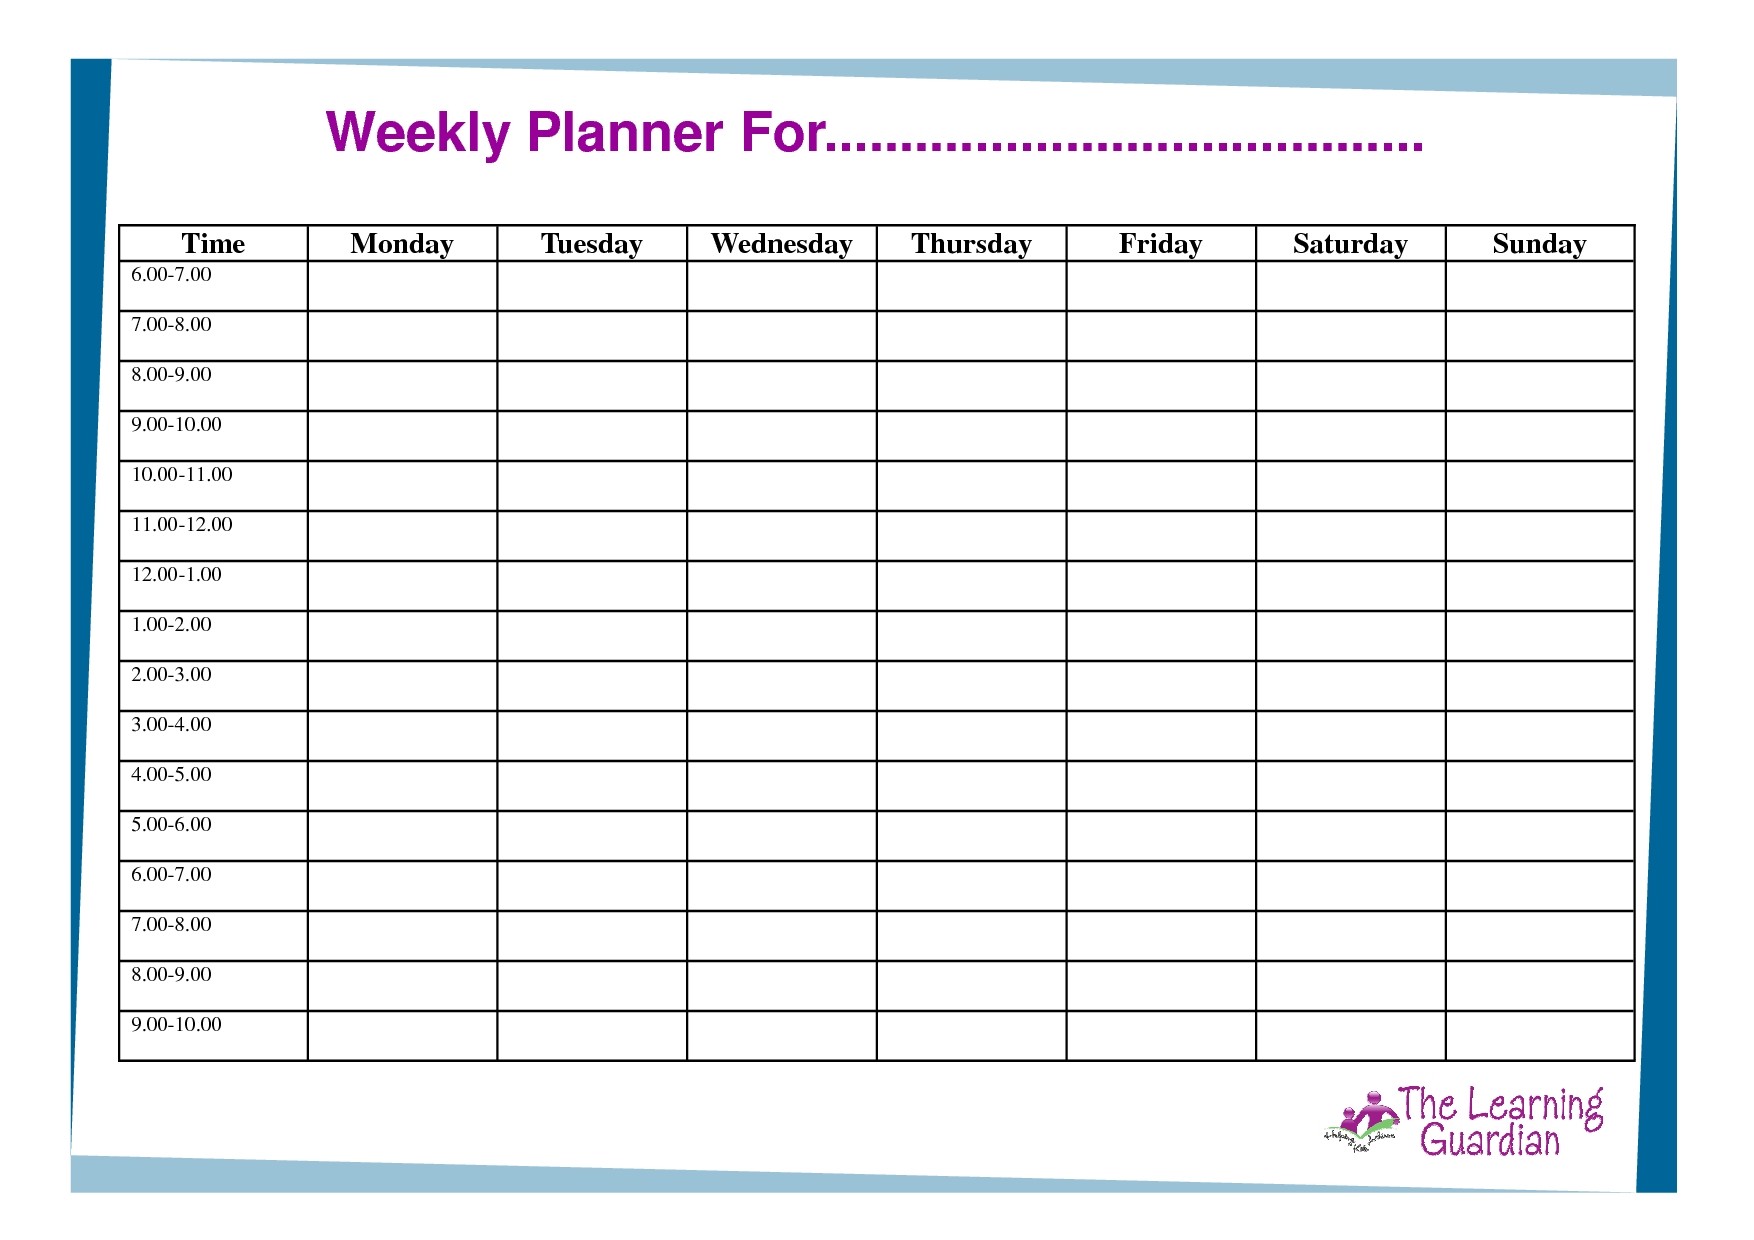 Free Printable Weekly Calendar Templates | Weekly Planner For Time intended for Printable Appointment Calendars Monday Through Friday